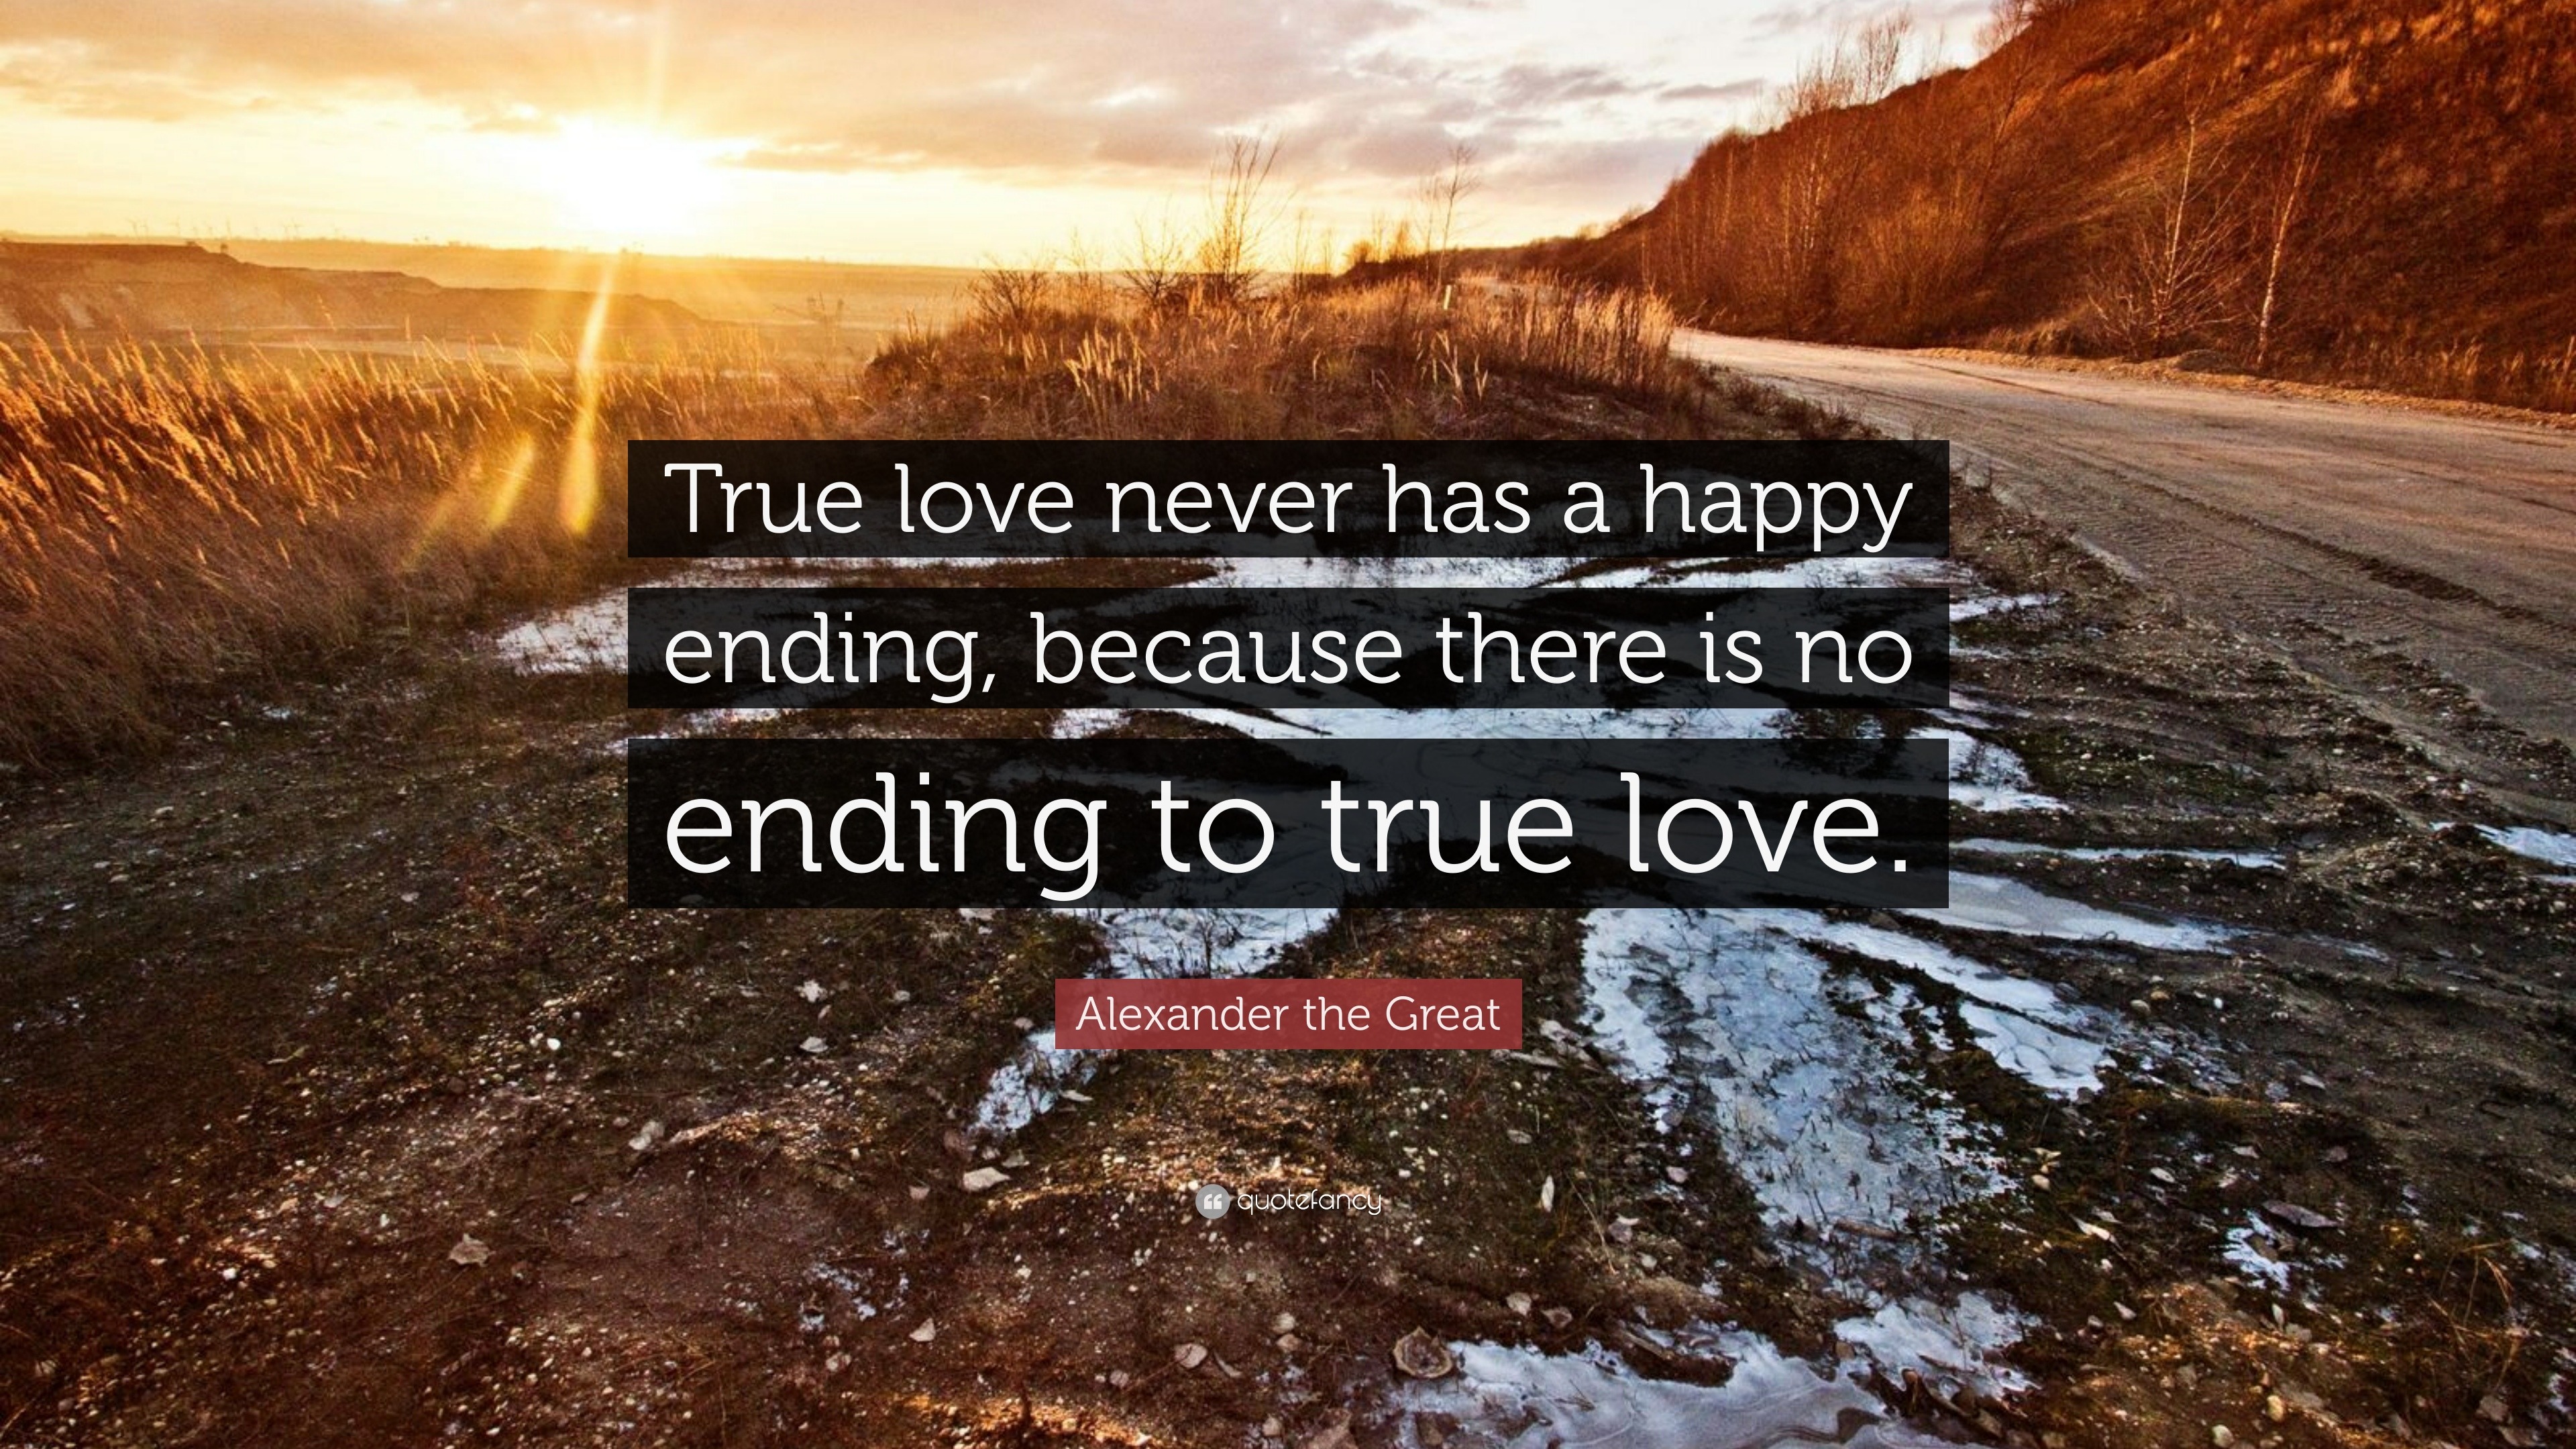 Happy Ending Quotes About Love - quotes about love